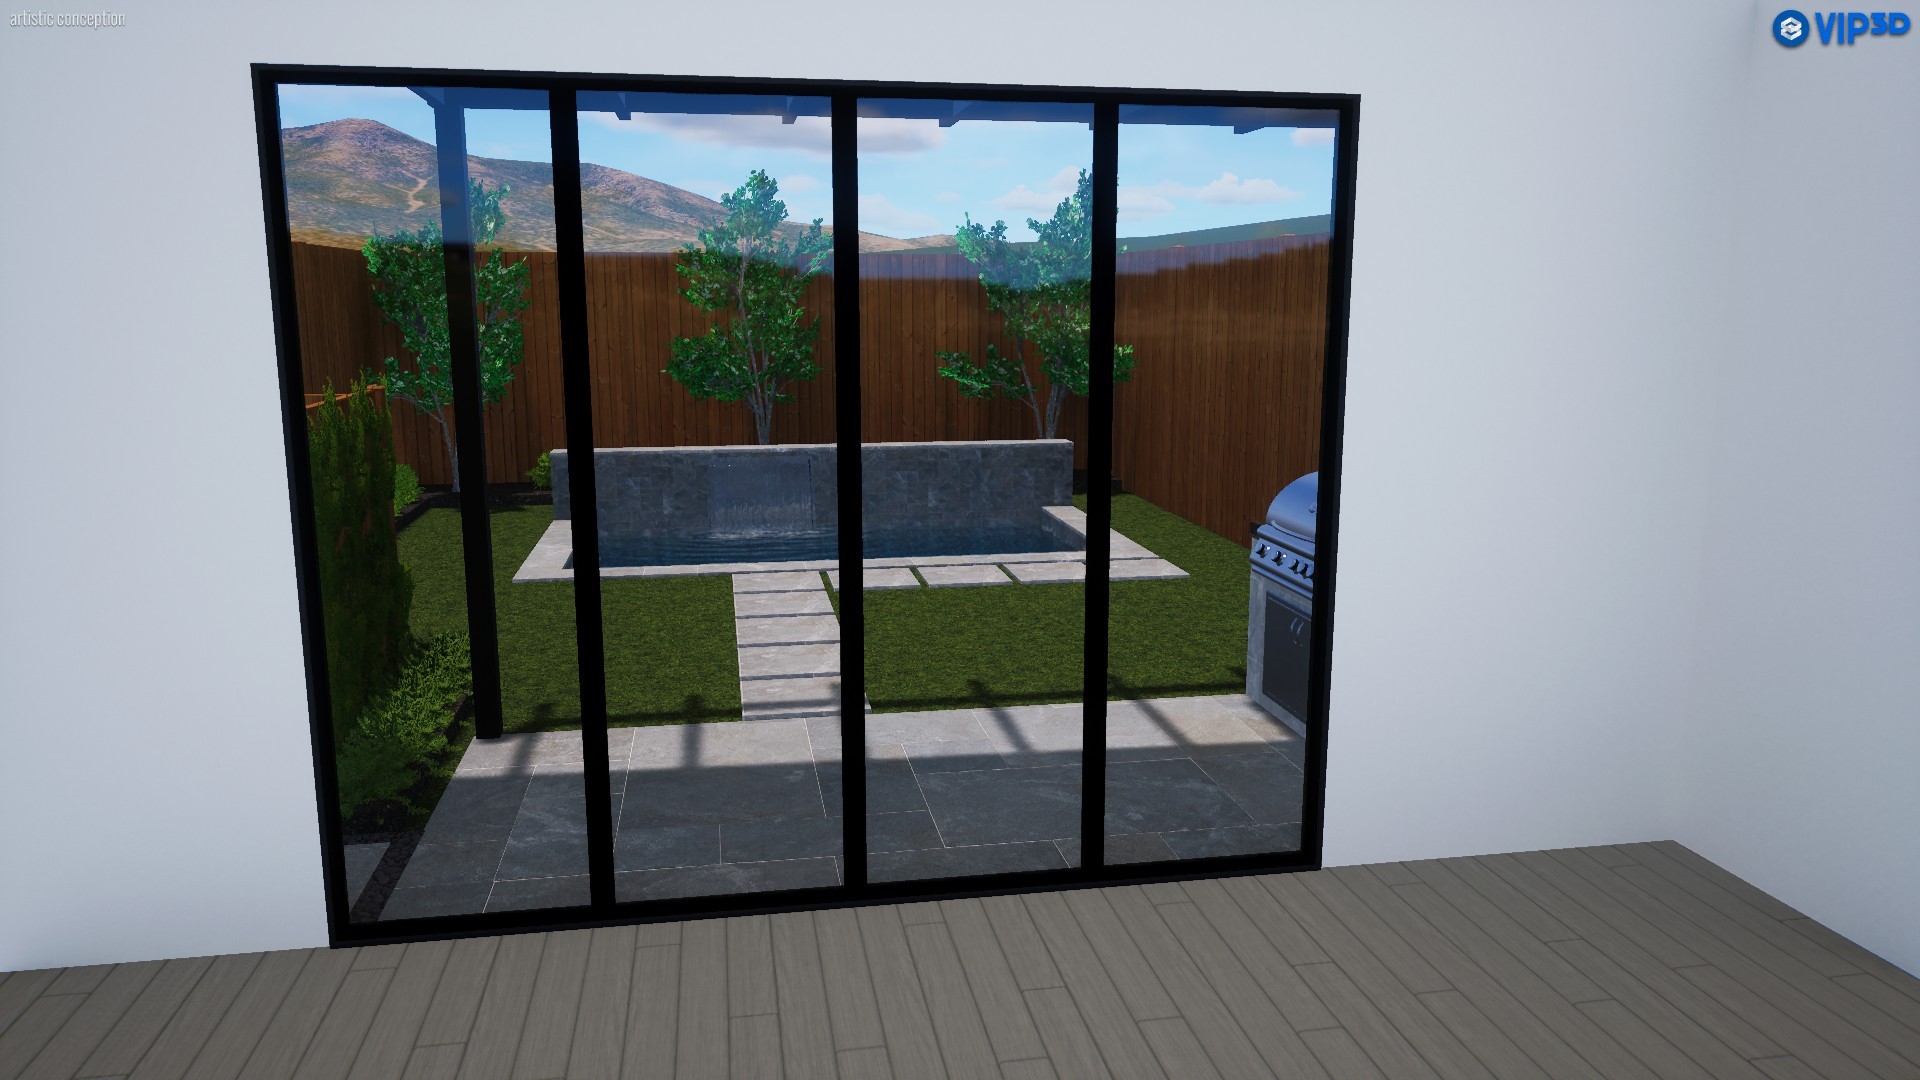 Rendering of the possible pool area from inside the home (this is considered an upgrade and not included in the price).